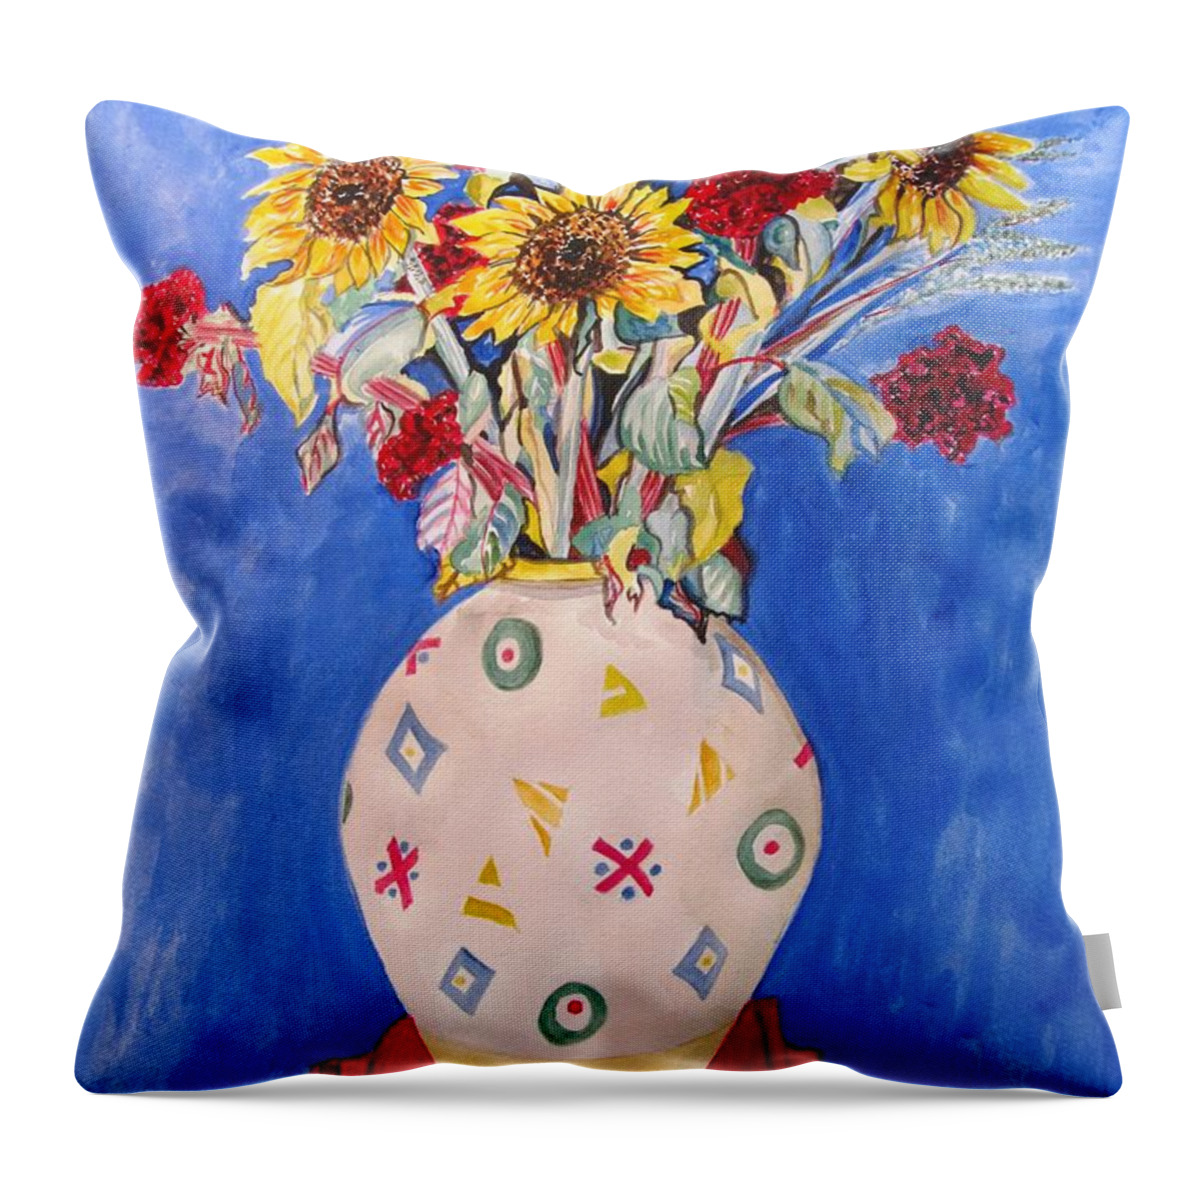 Sunflowers At Home Throw Pillow featuring the painting Sunflowers at Home by Esther Newman-Cohen